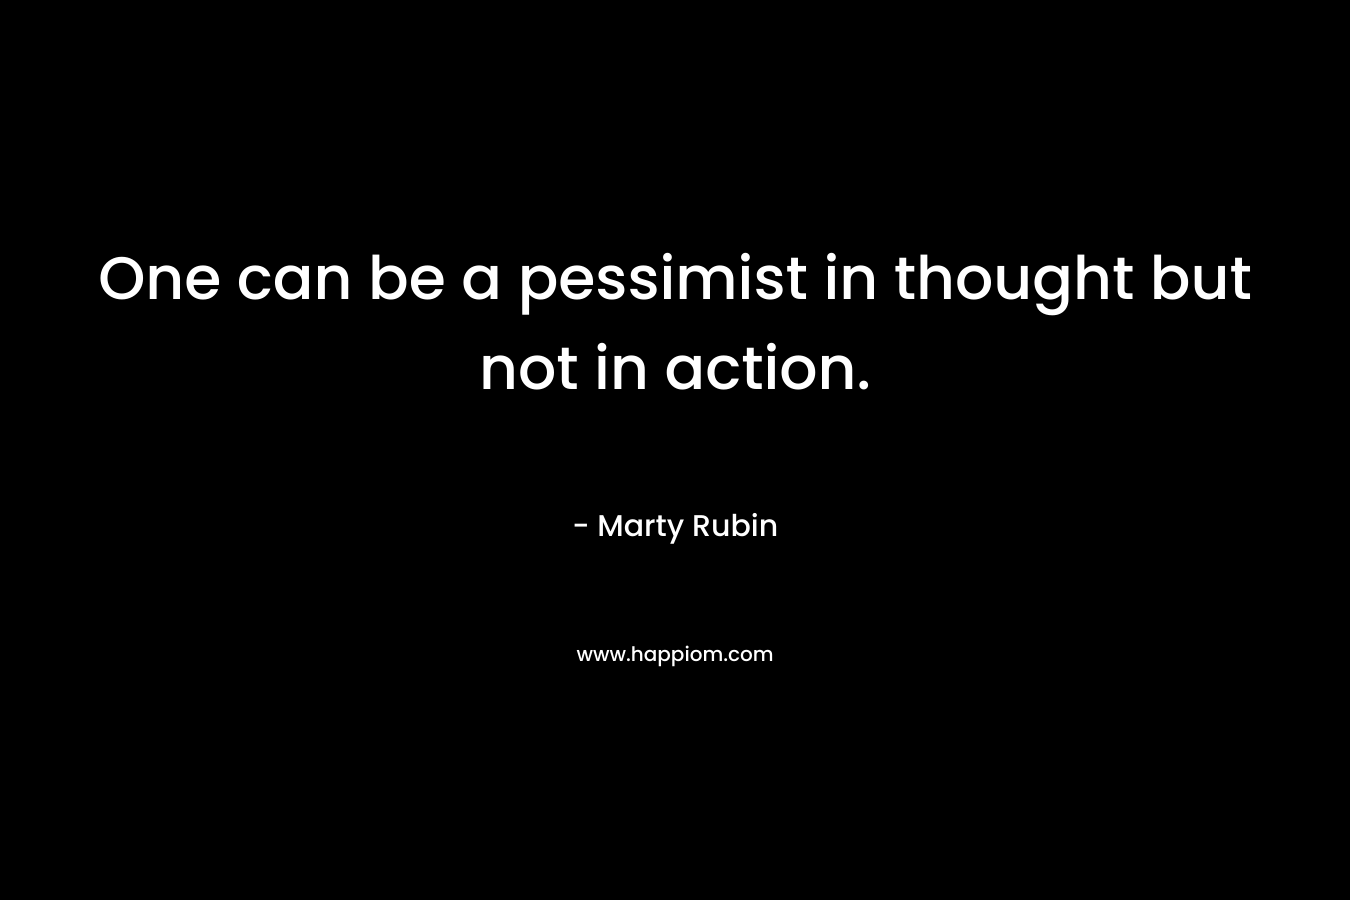 One can be a pessimist in thought but not in action. – Marty Rubin